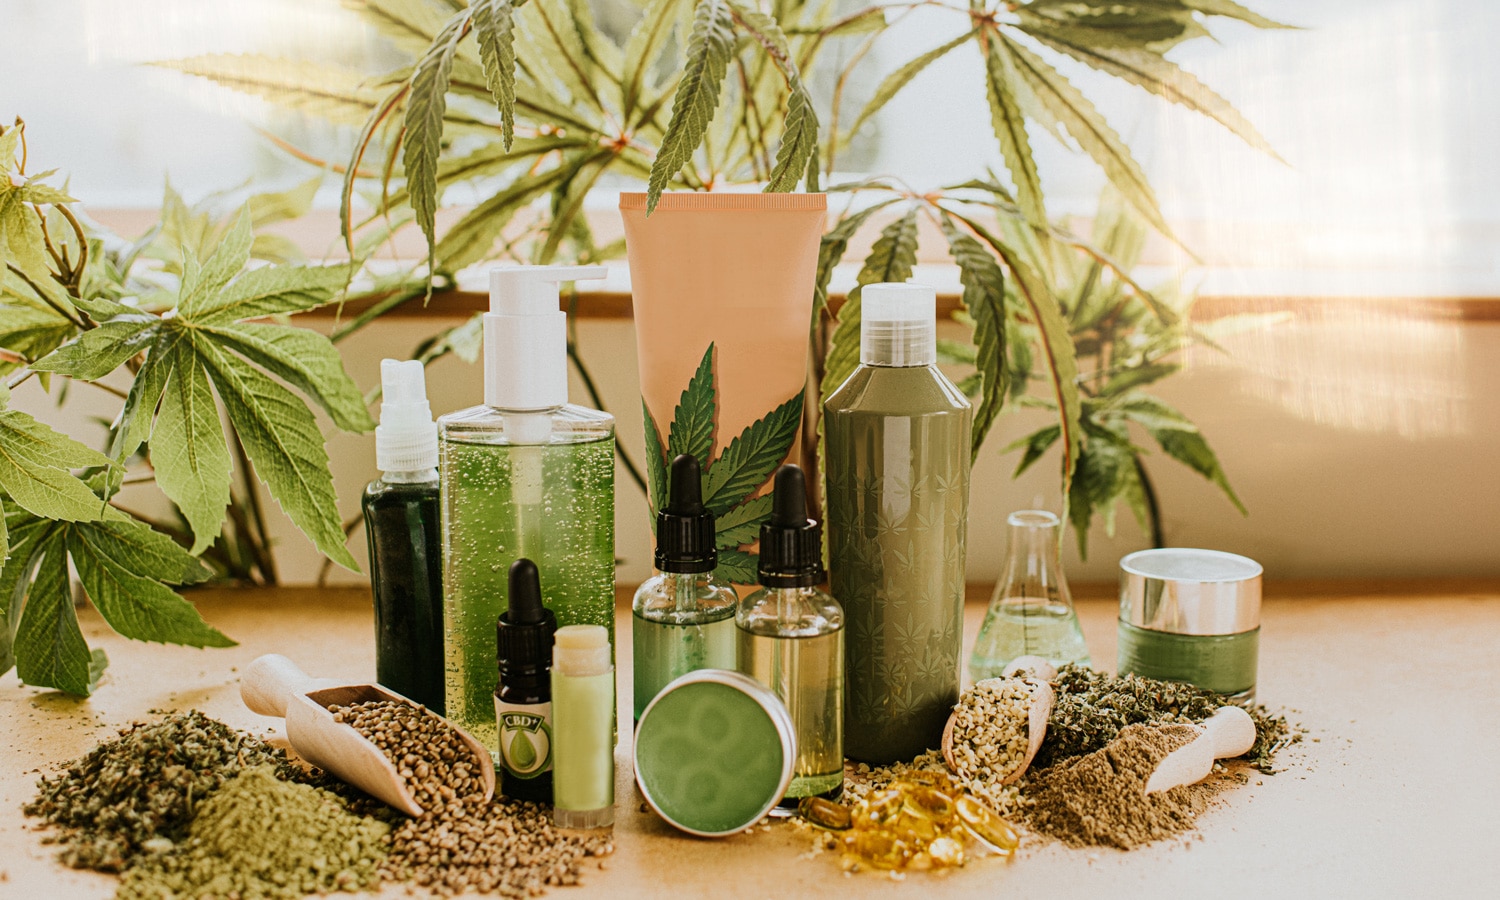 Dermatologists Chime In On The Effectiveness Of CBD Beauty Products